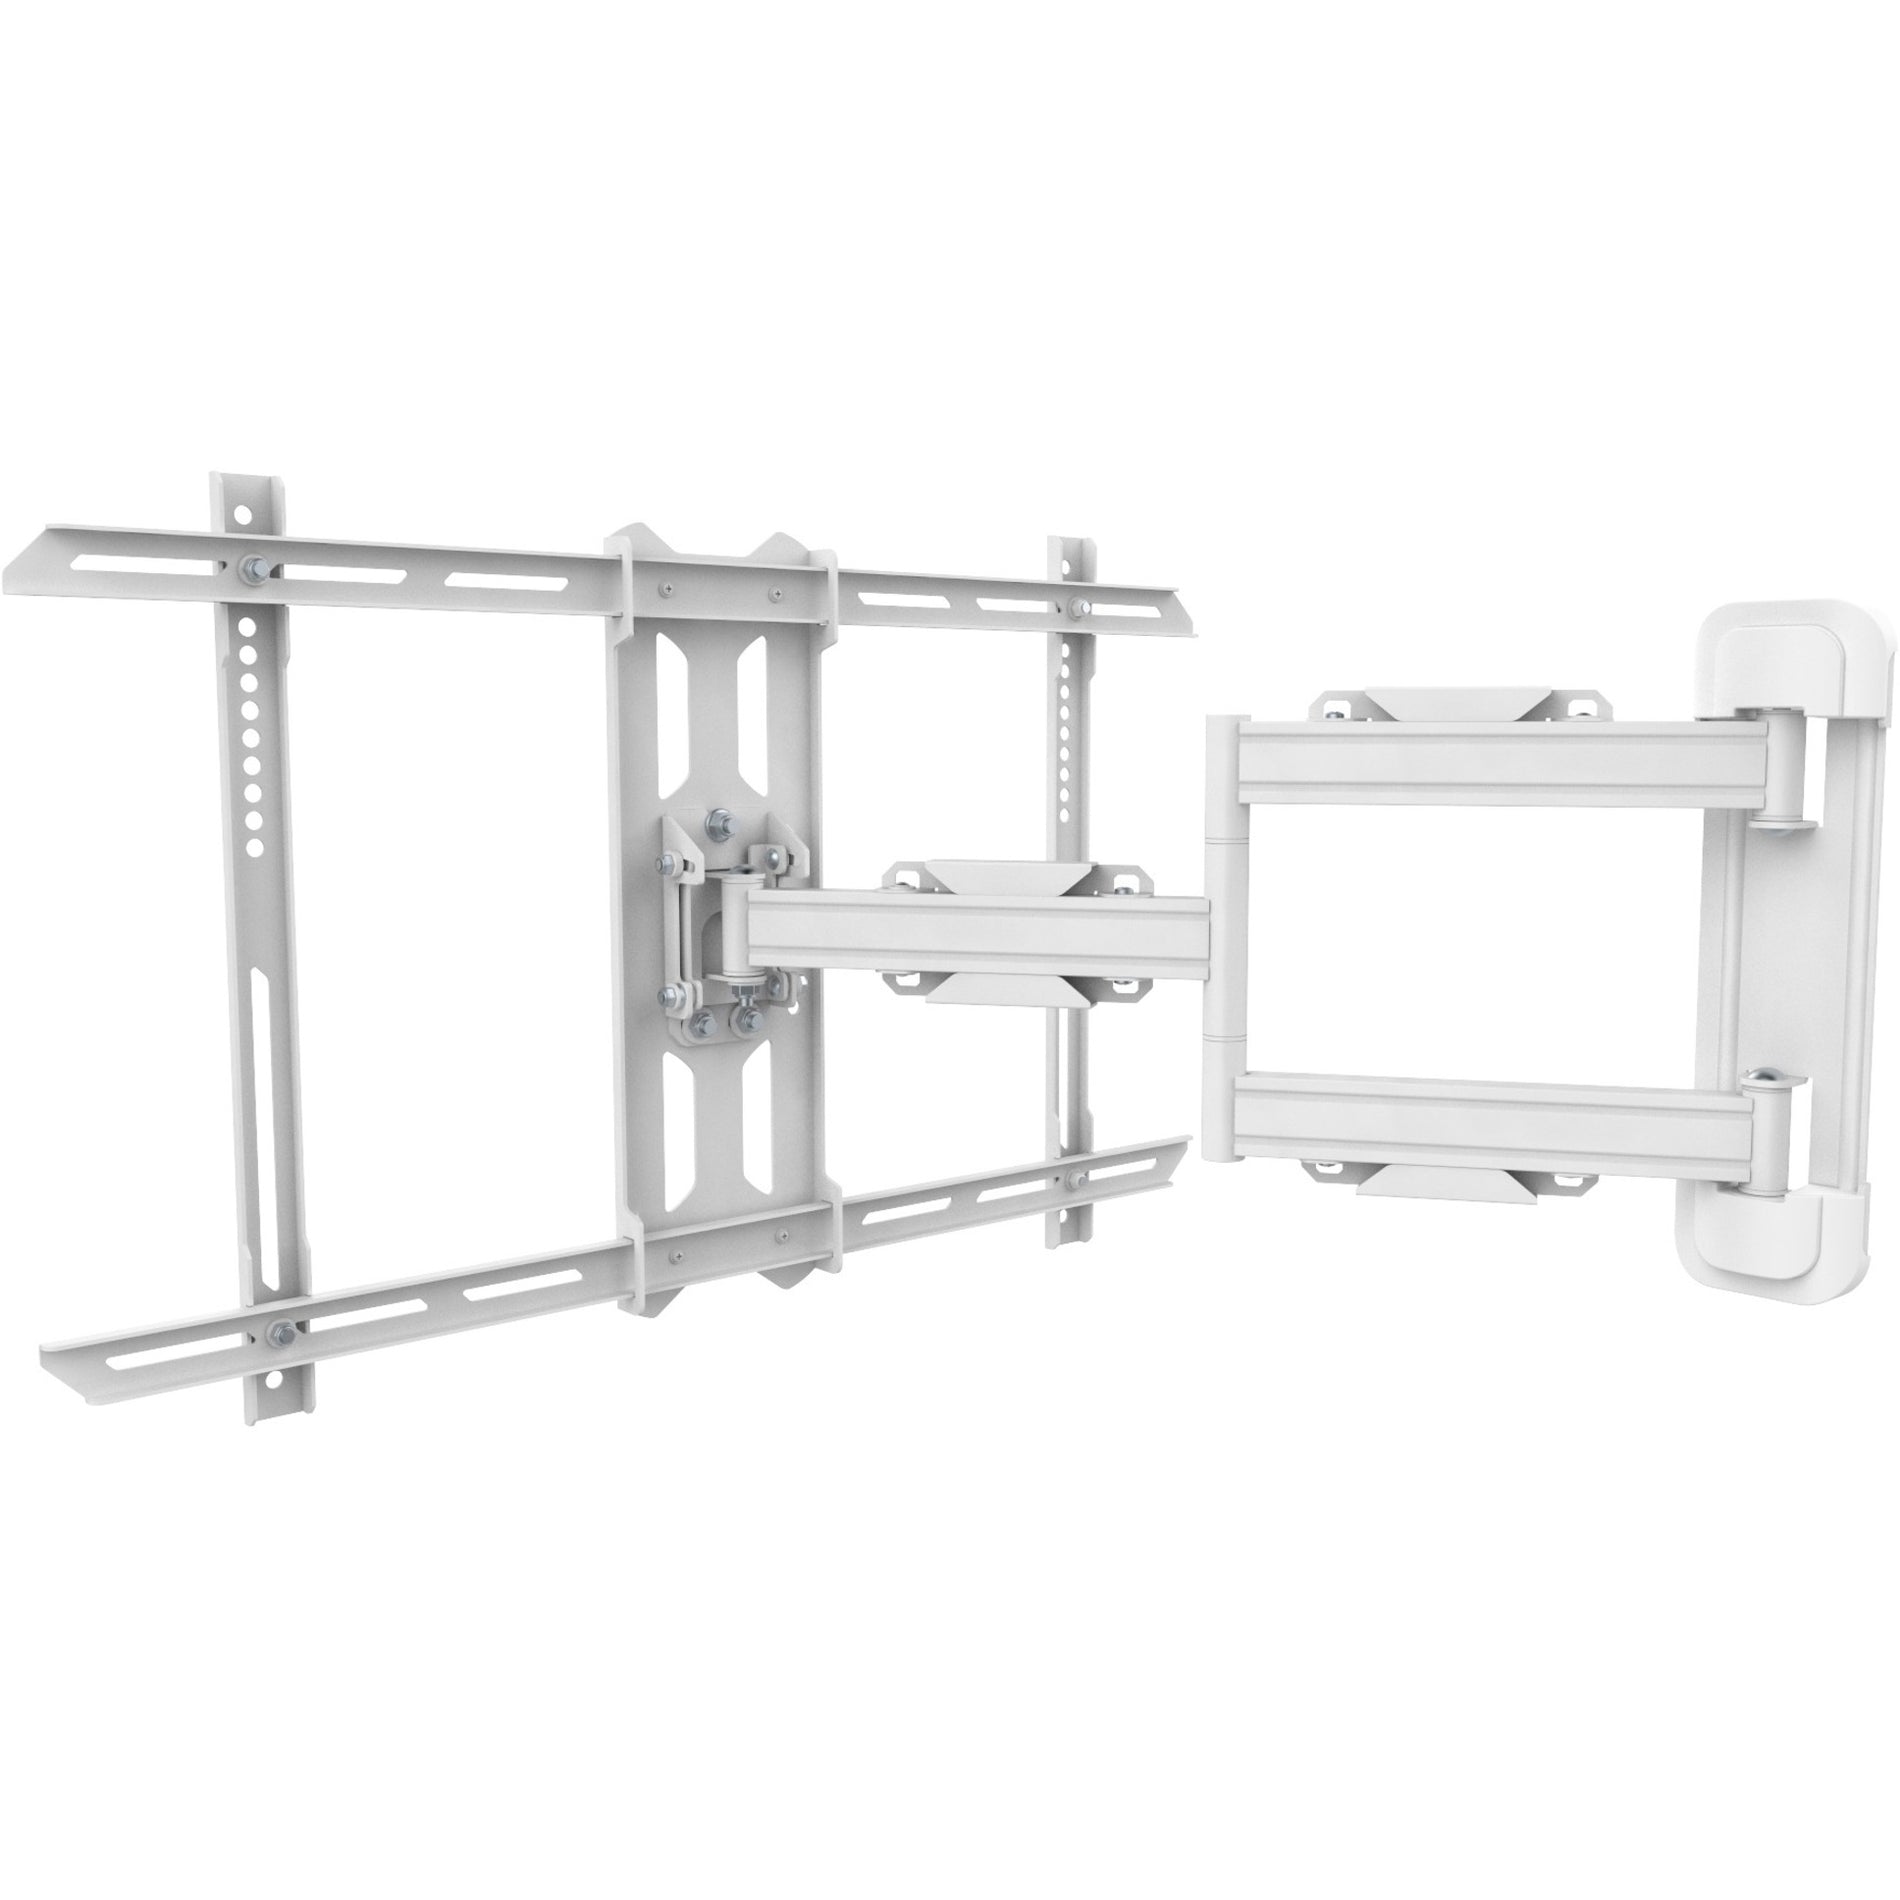 Kanto PS350W Full Motion Wall Mount for 37" to 60" TVs - White [Discontinued]